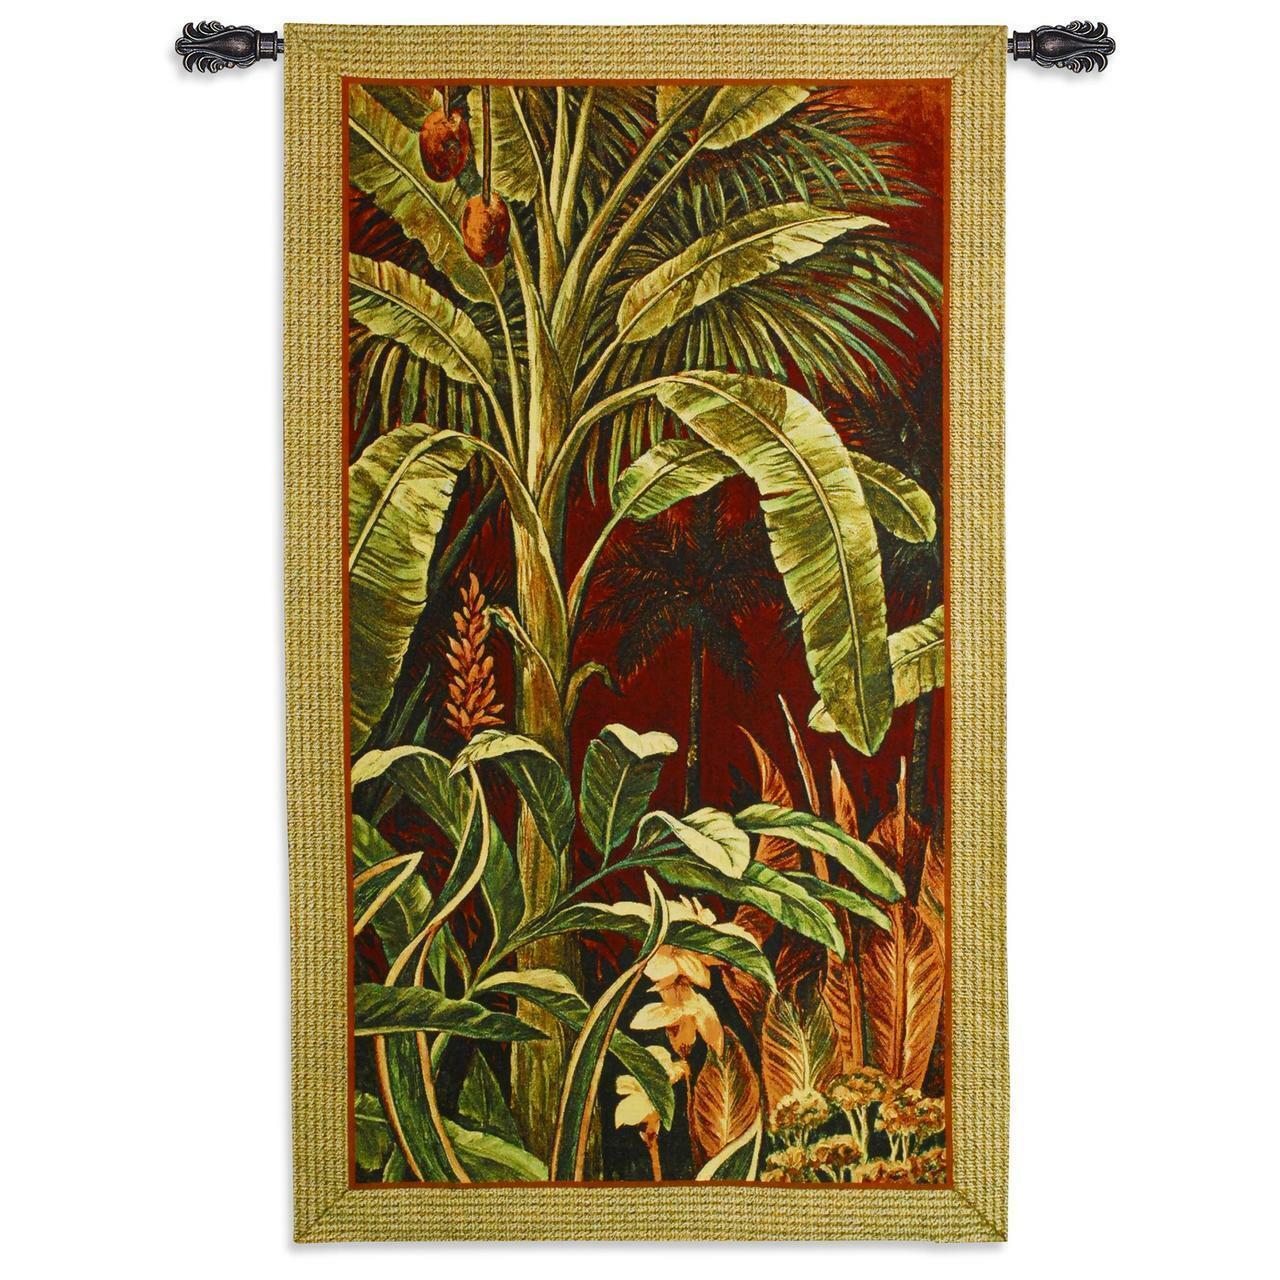 35x60 BALI GARDEN I Palm Jungle Tropical Tapestry Wall Hanging - $168.30